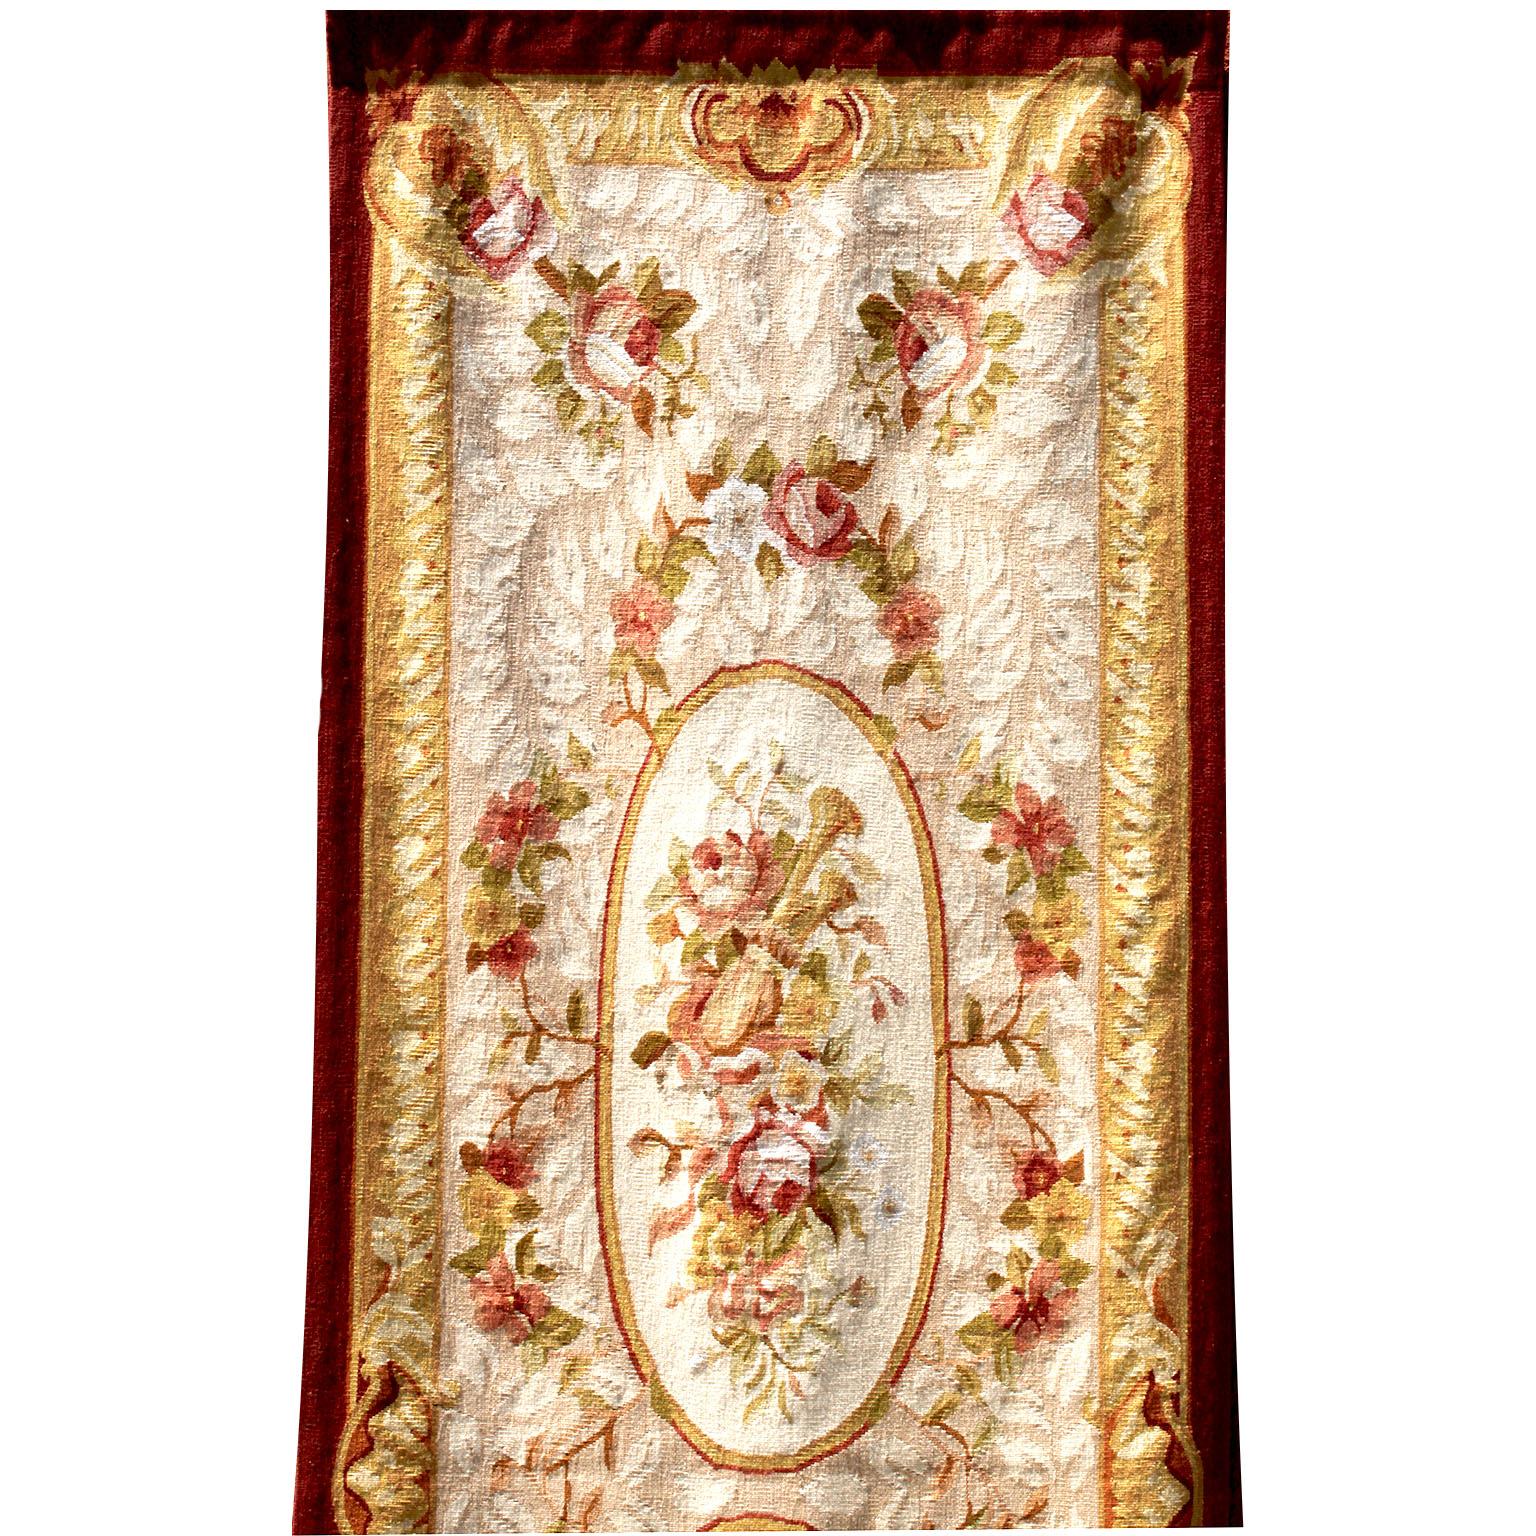 A fine French 19th century Louis XV style Aubusson tapestry panel. The elongated tapestry fragment with a floral design of rose bouquets and strands, with two oval panels centered by floral bouquets and an acanthus and floral border. Circa: